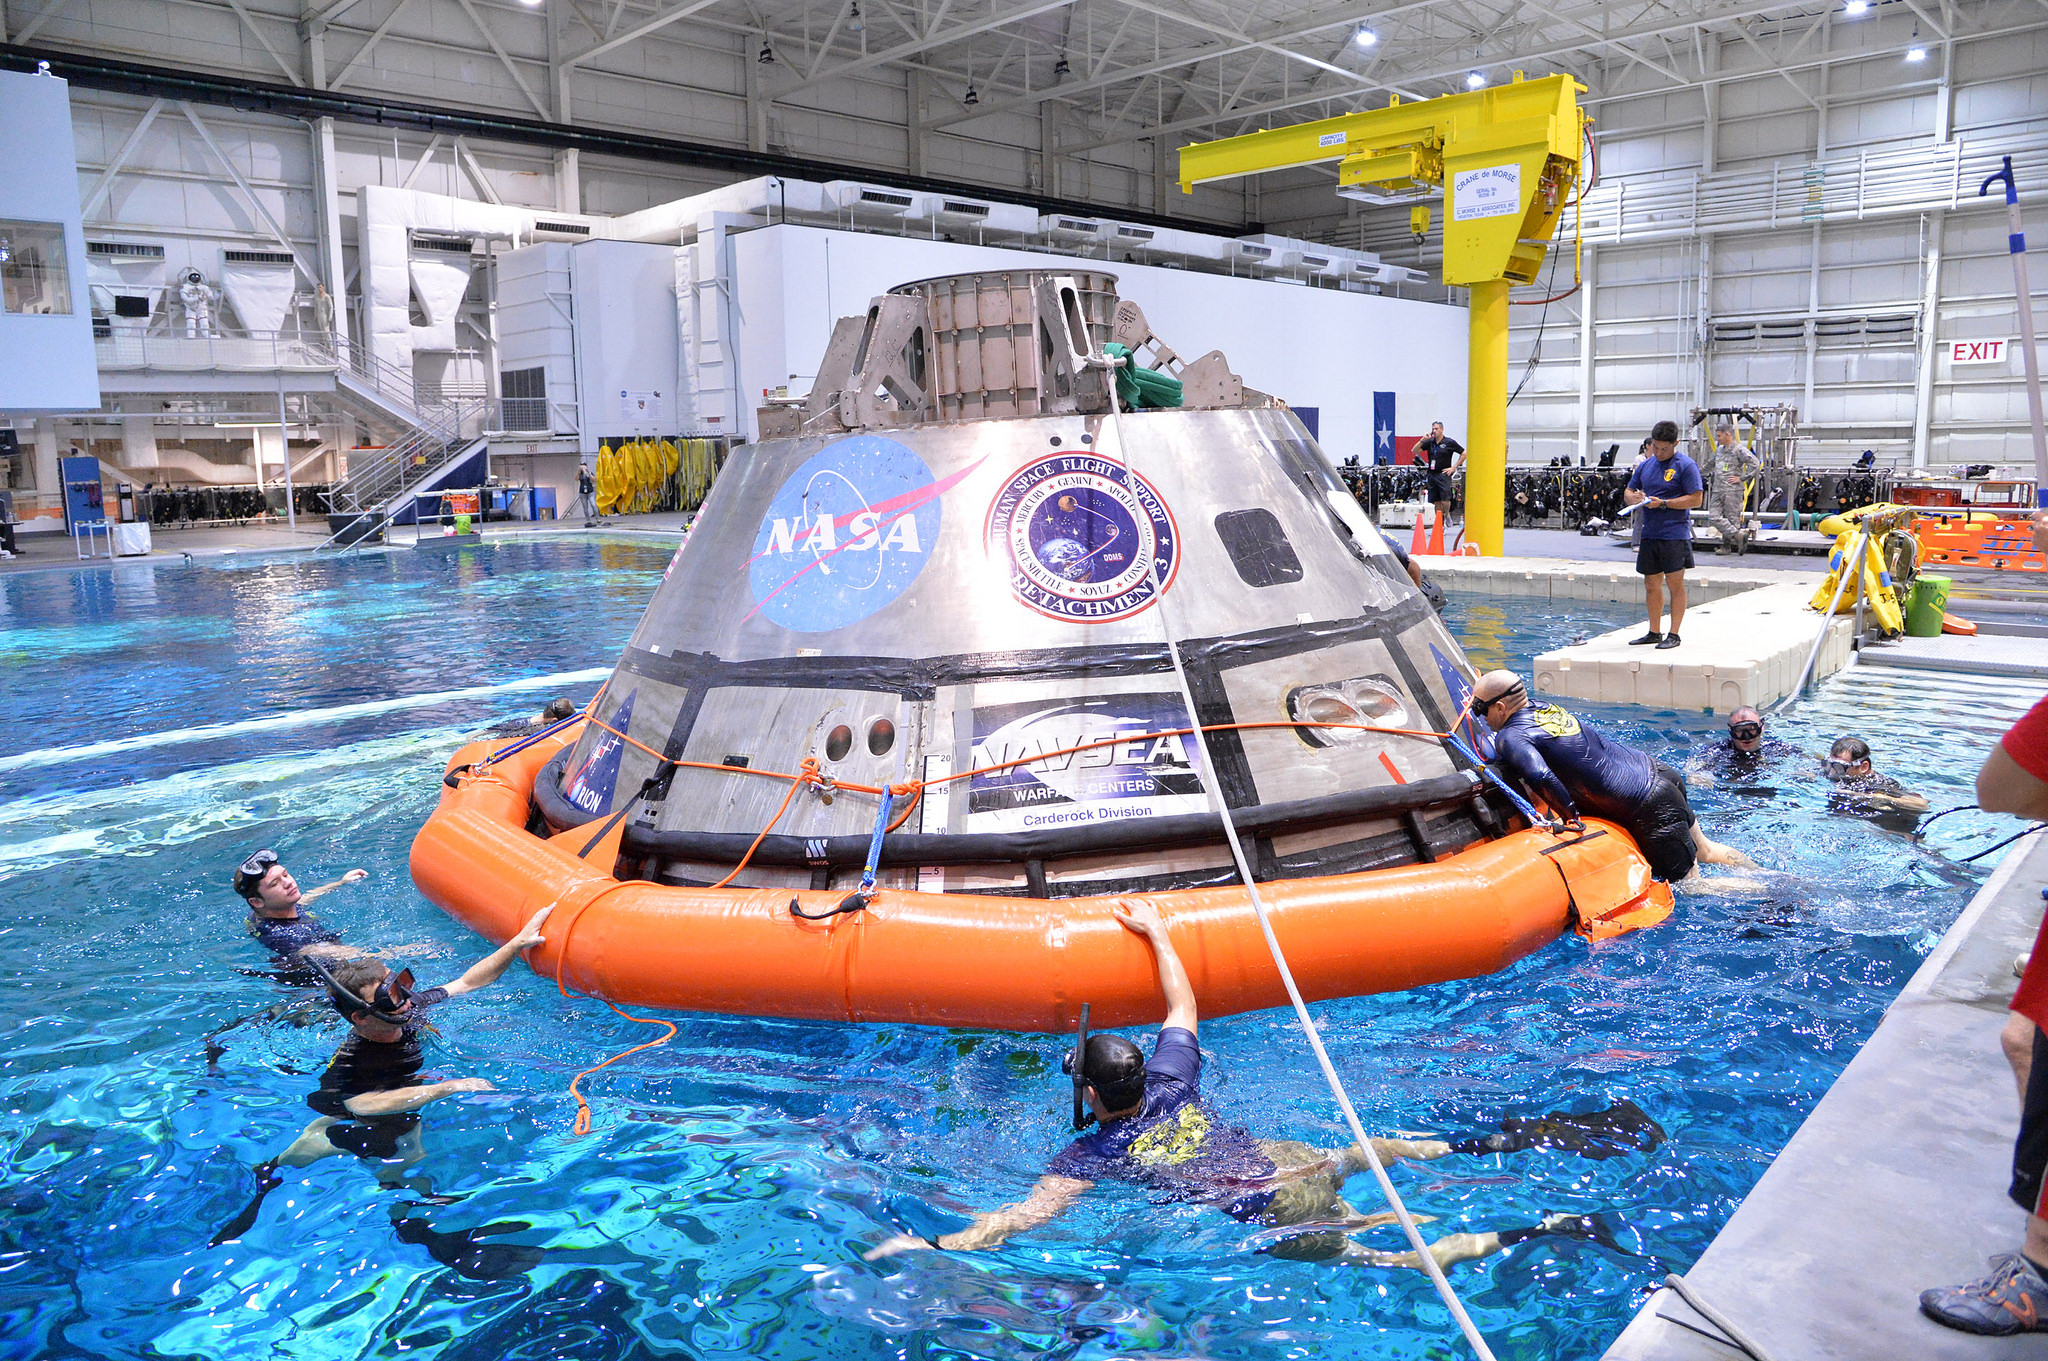 Divers Practice Orion Recovery Techniques in Giant Pool at JSC | NASA